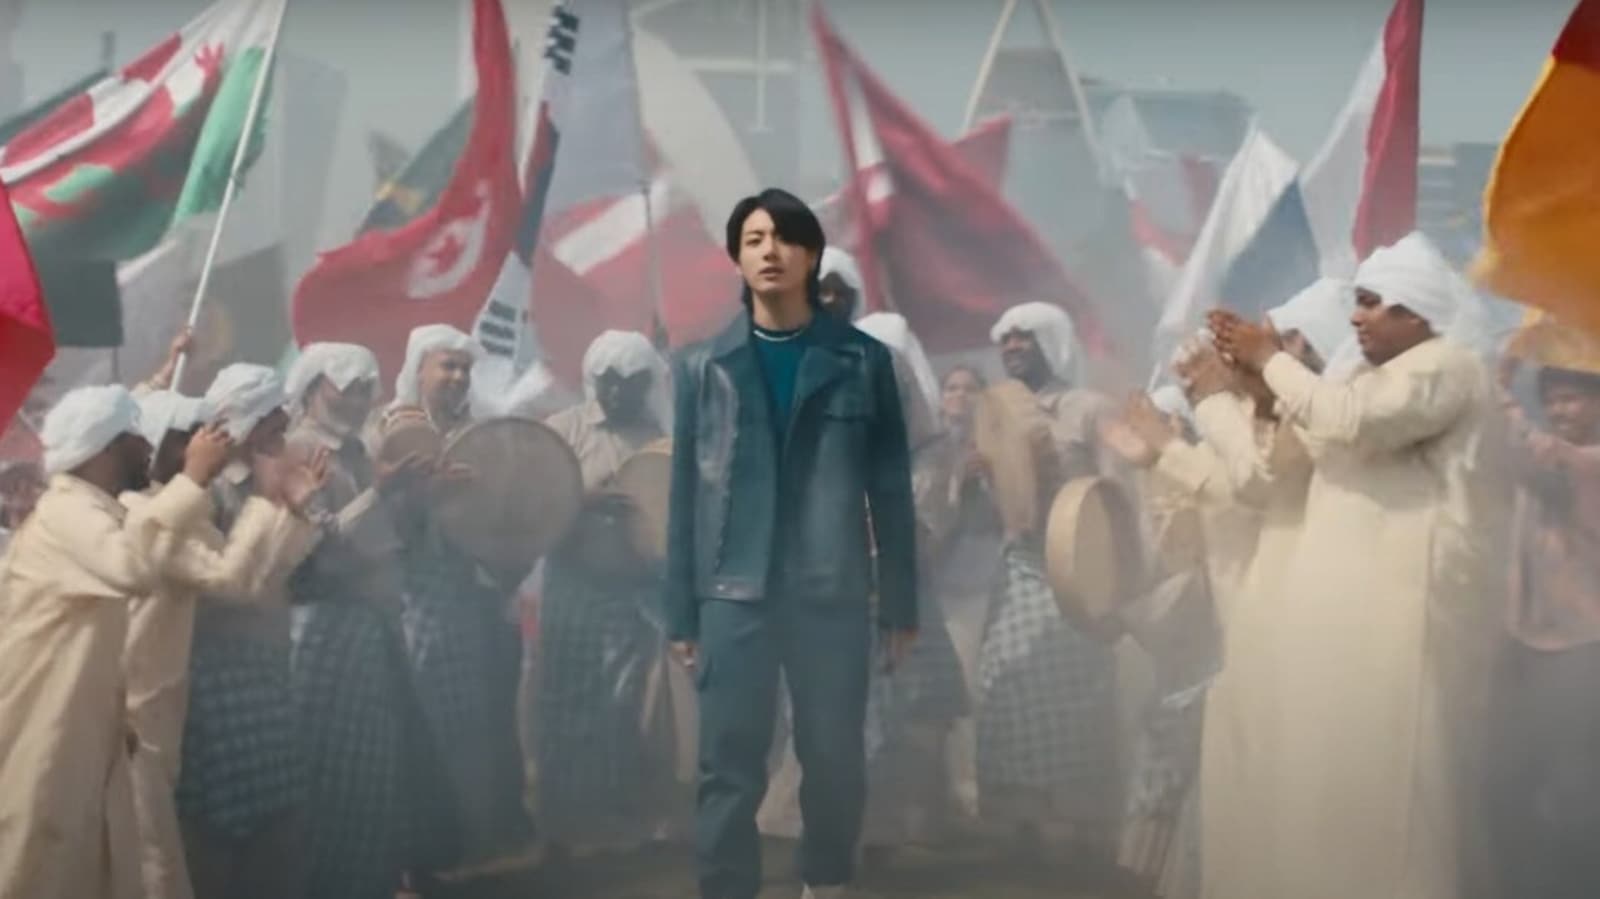 Jungkook dances atop skyscraper, shares message of peace in music video of FIFA World Cup anthem Dreamers